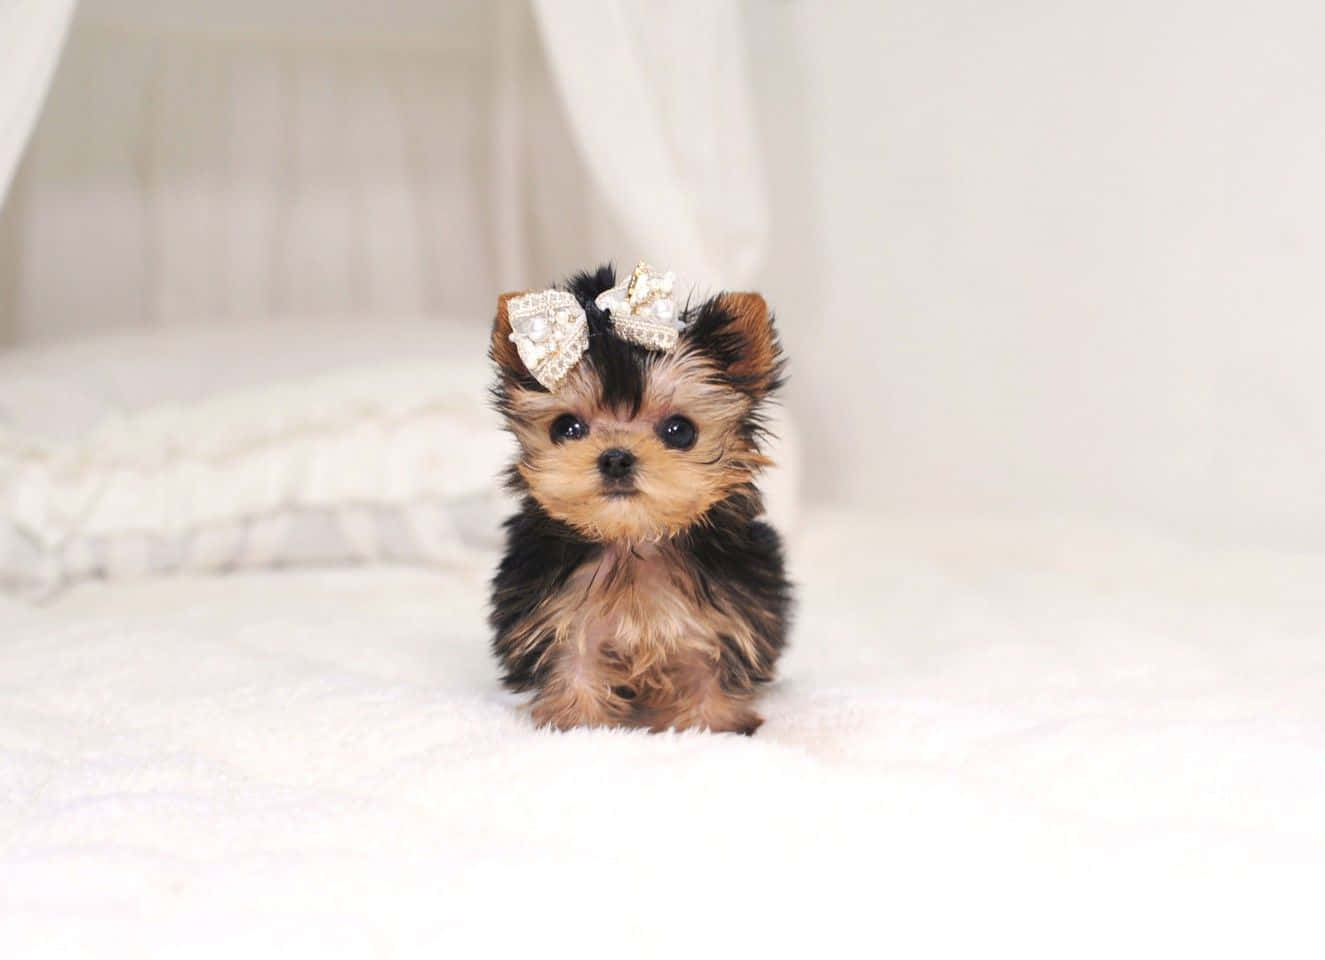 A Teacup Yorkie near a pillow, looking for someone to play with Wallpaper